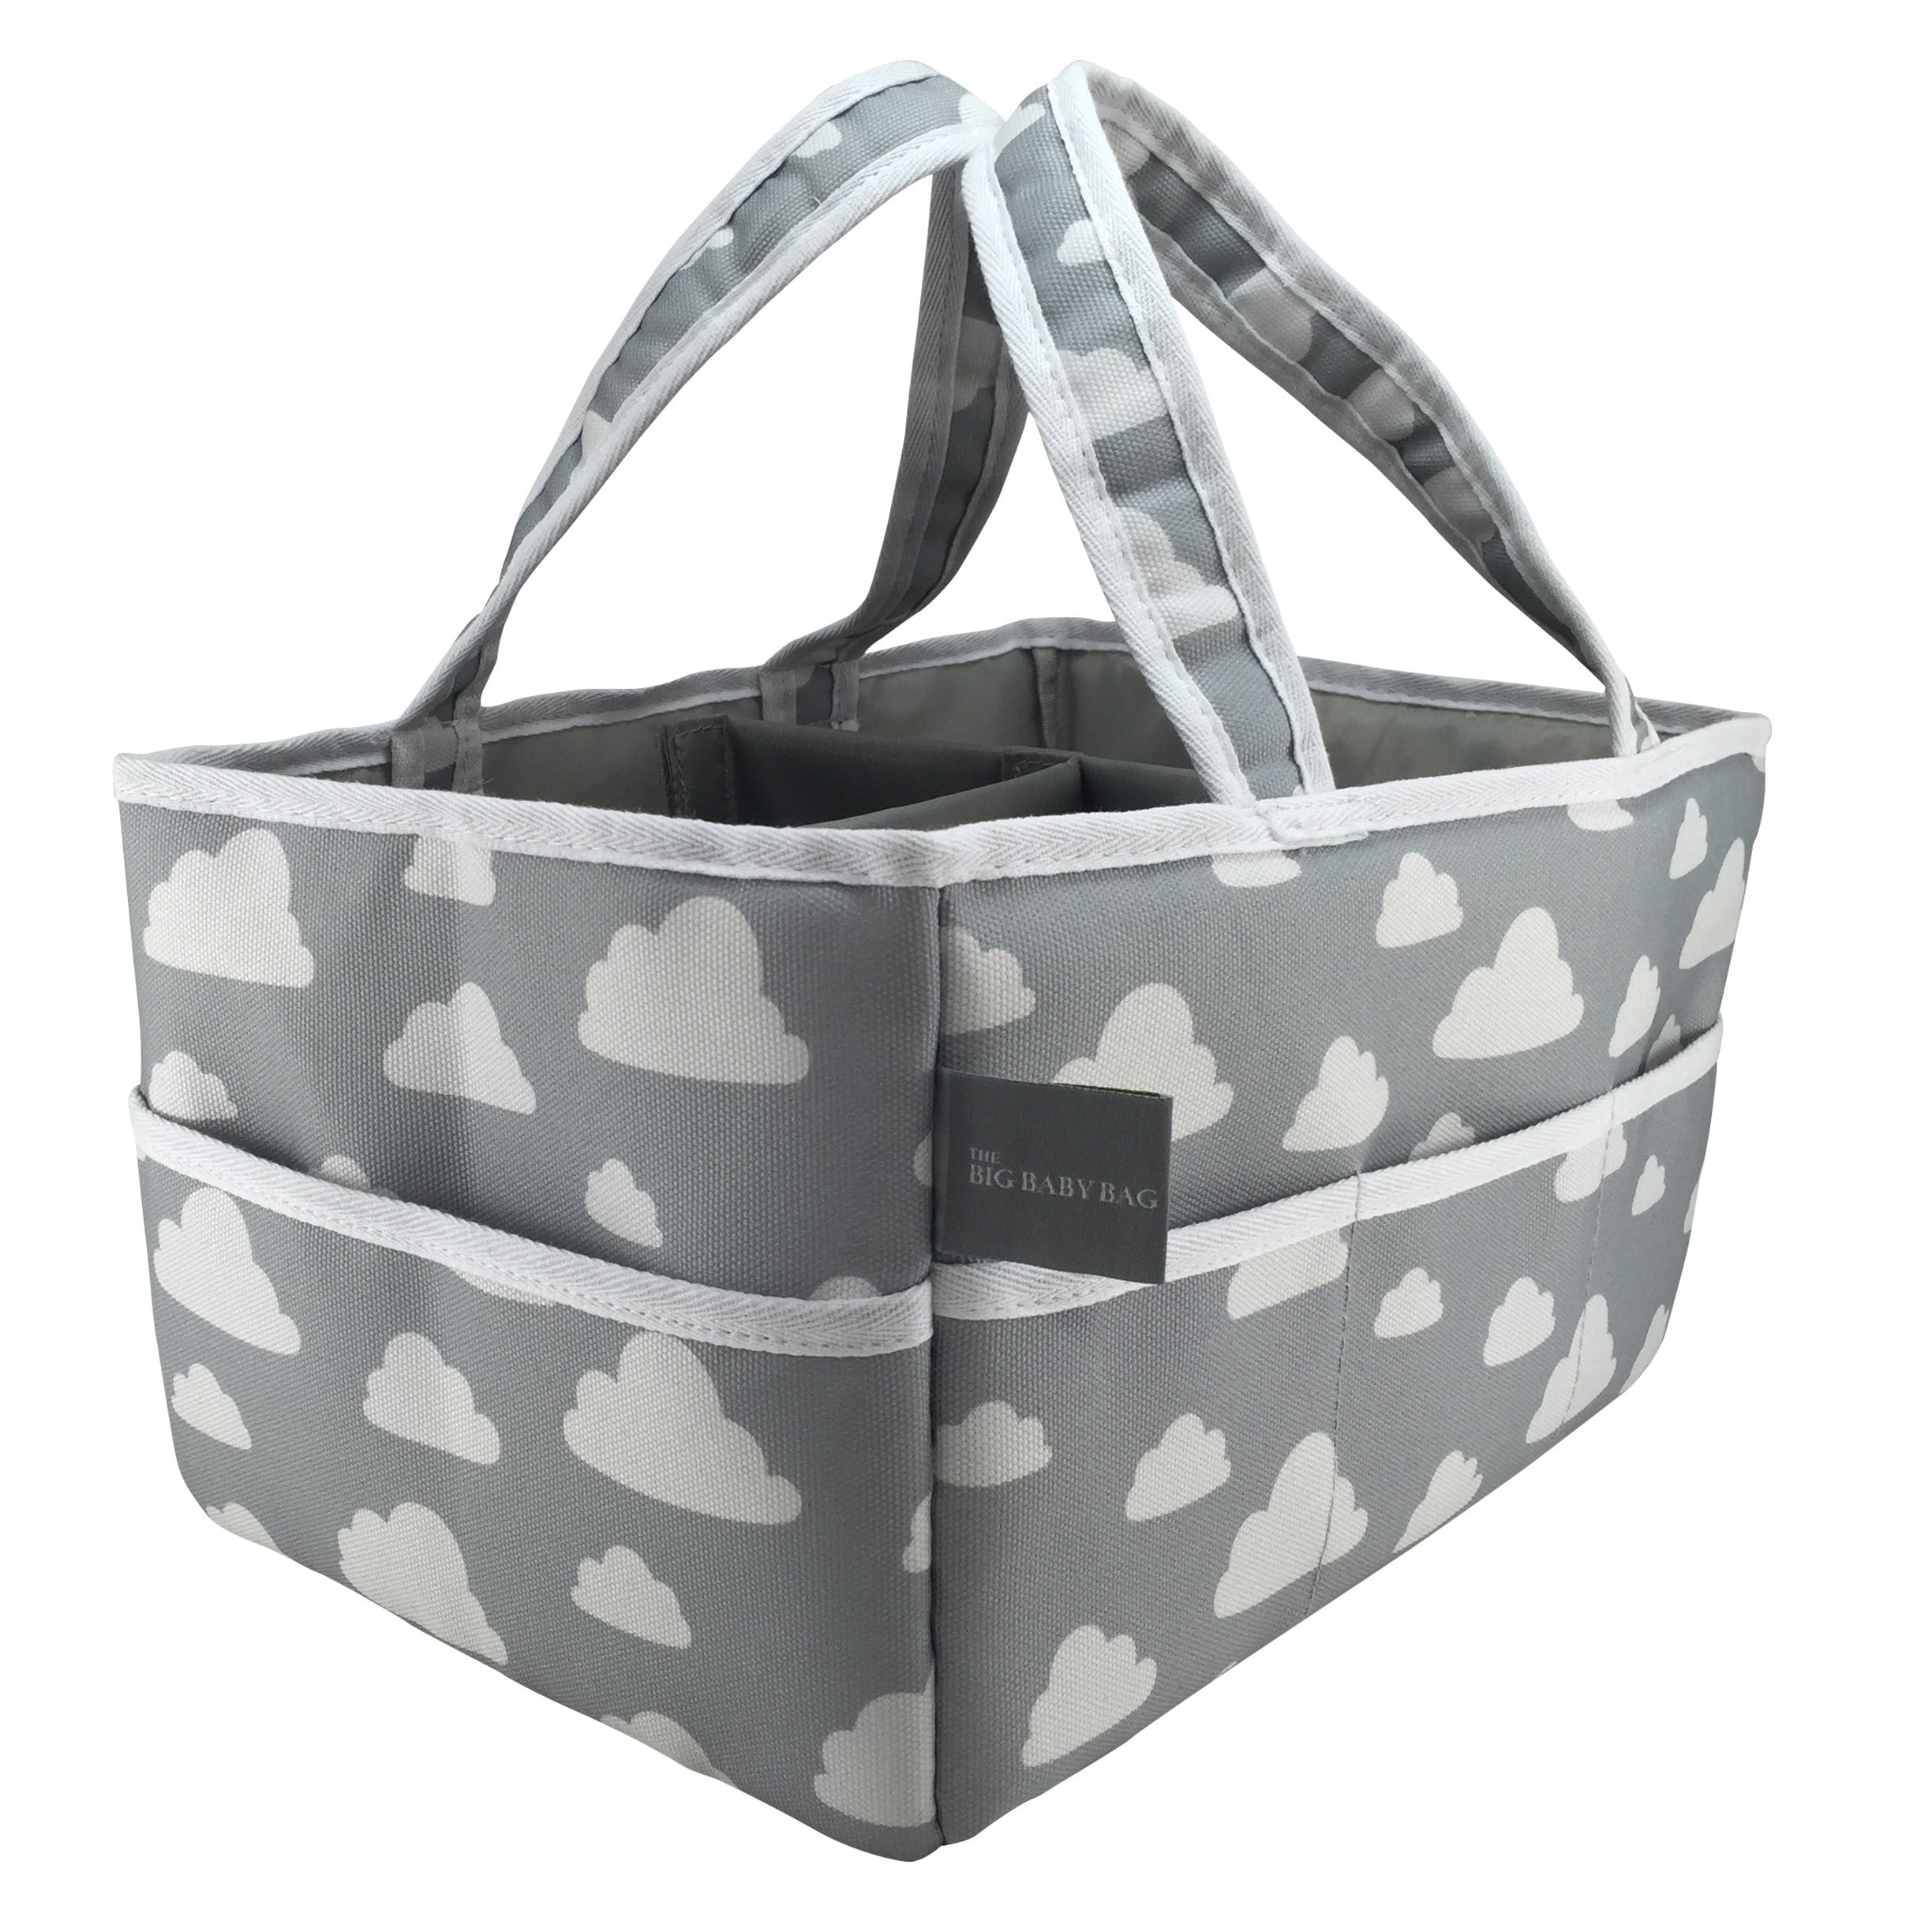 Toddler Baby Diaper Toy Caddy with FREE Changing Pad Nursery Items Storage Bag 